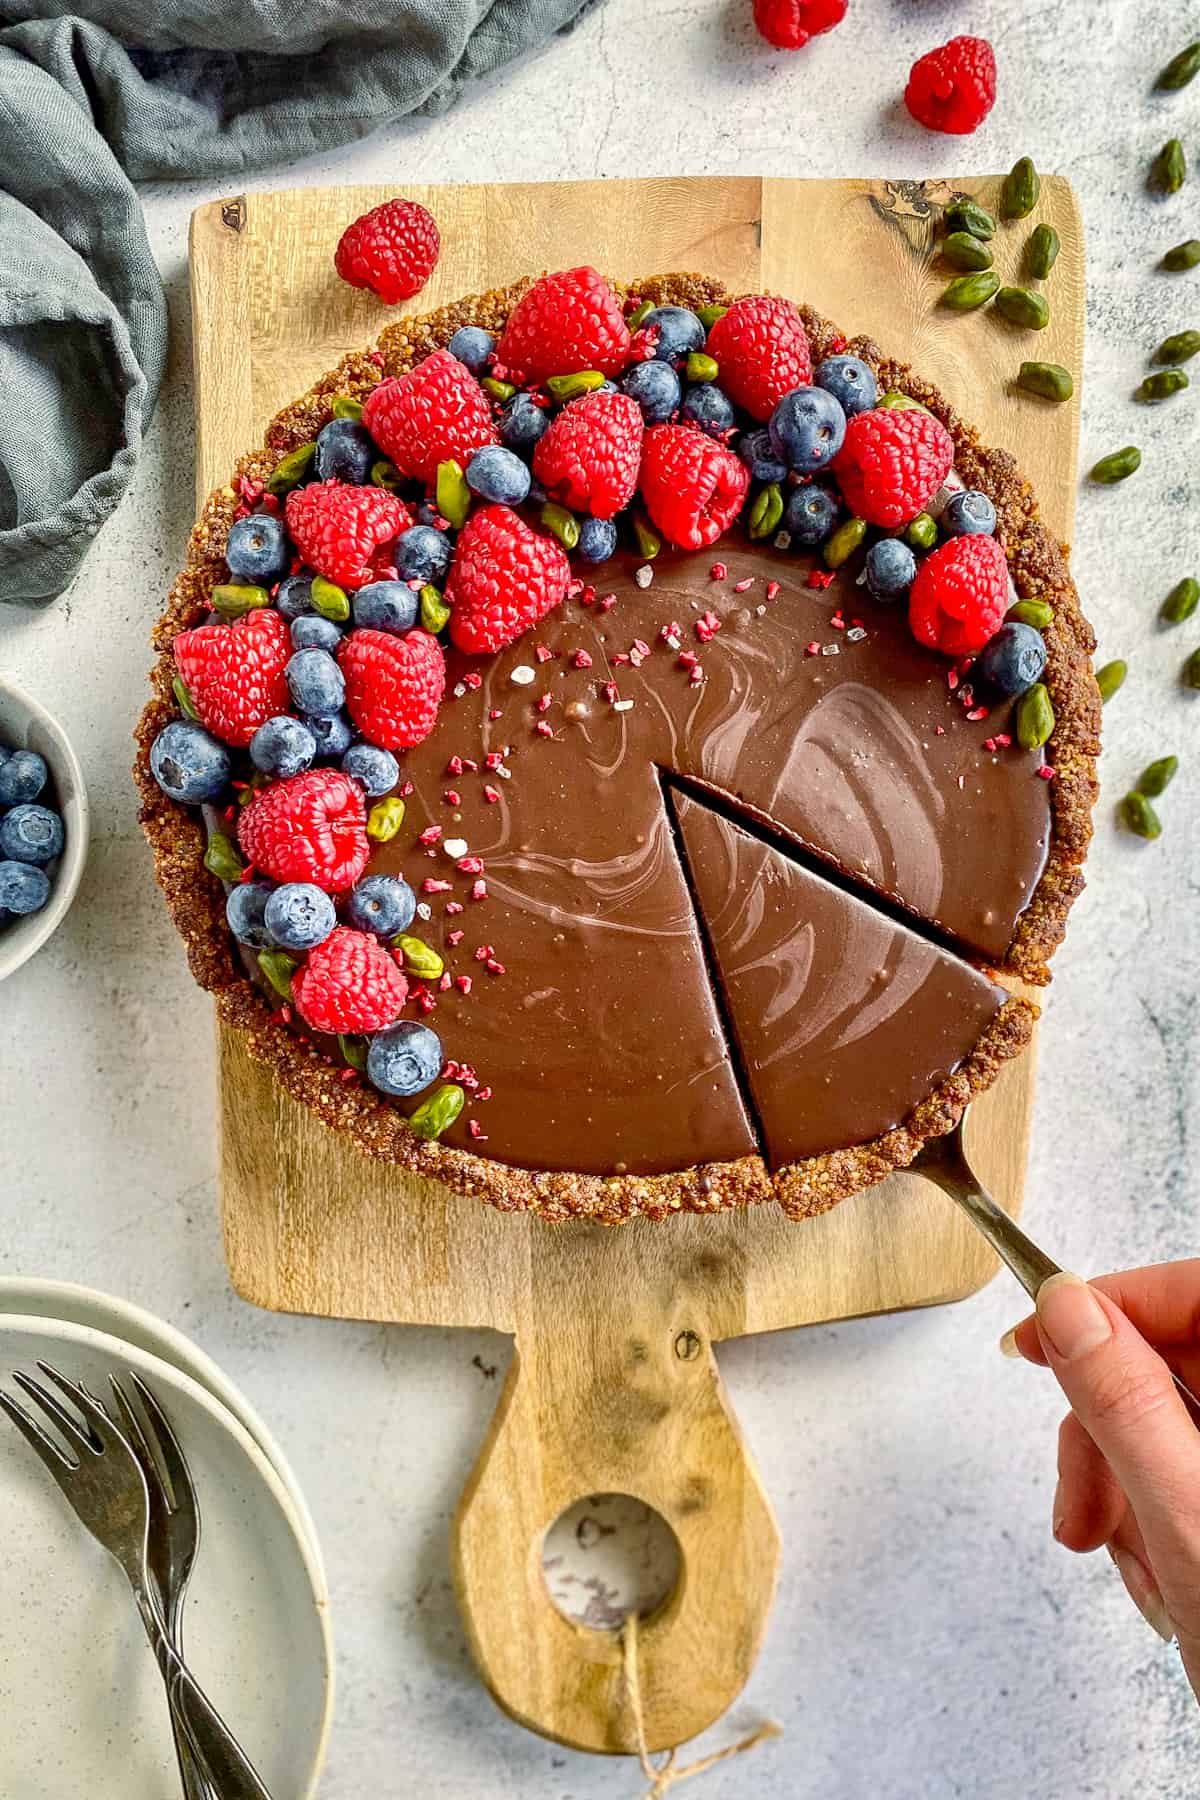 Vegan chocolate tart on a cutting board and topped with raspberries, blueberries, and pistachios.